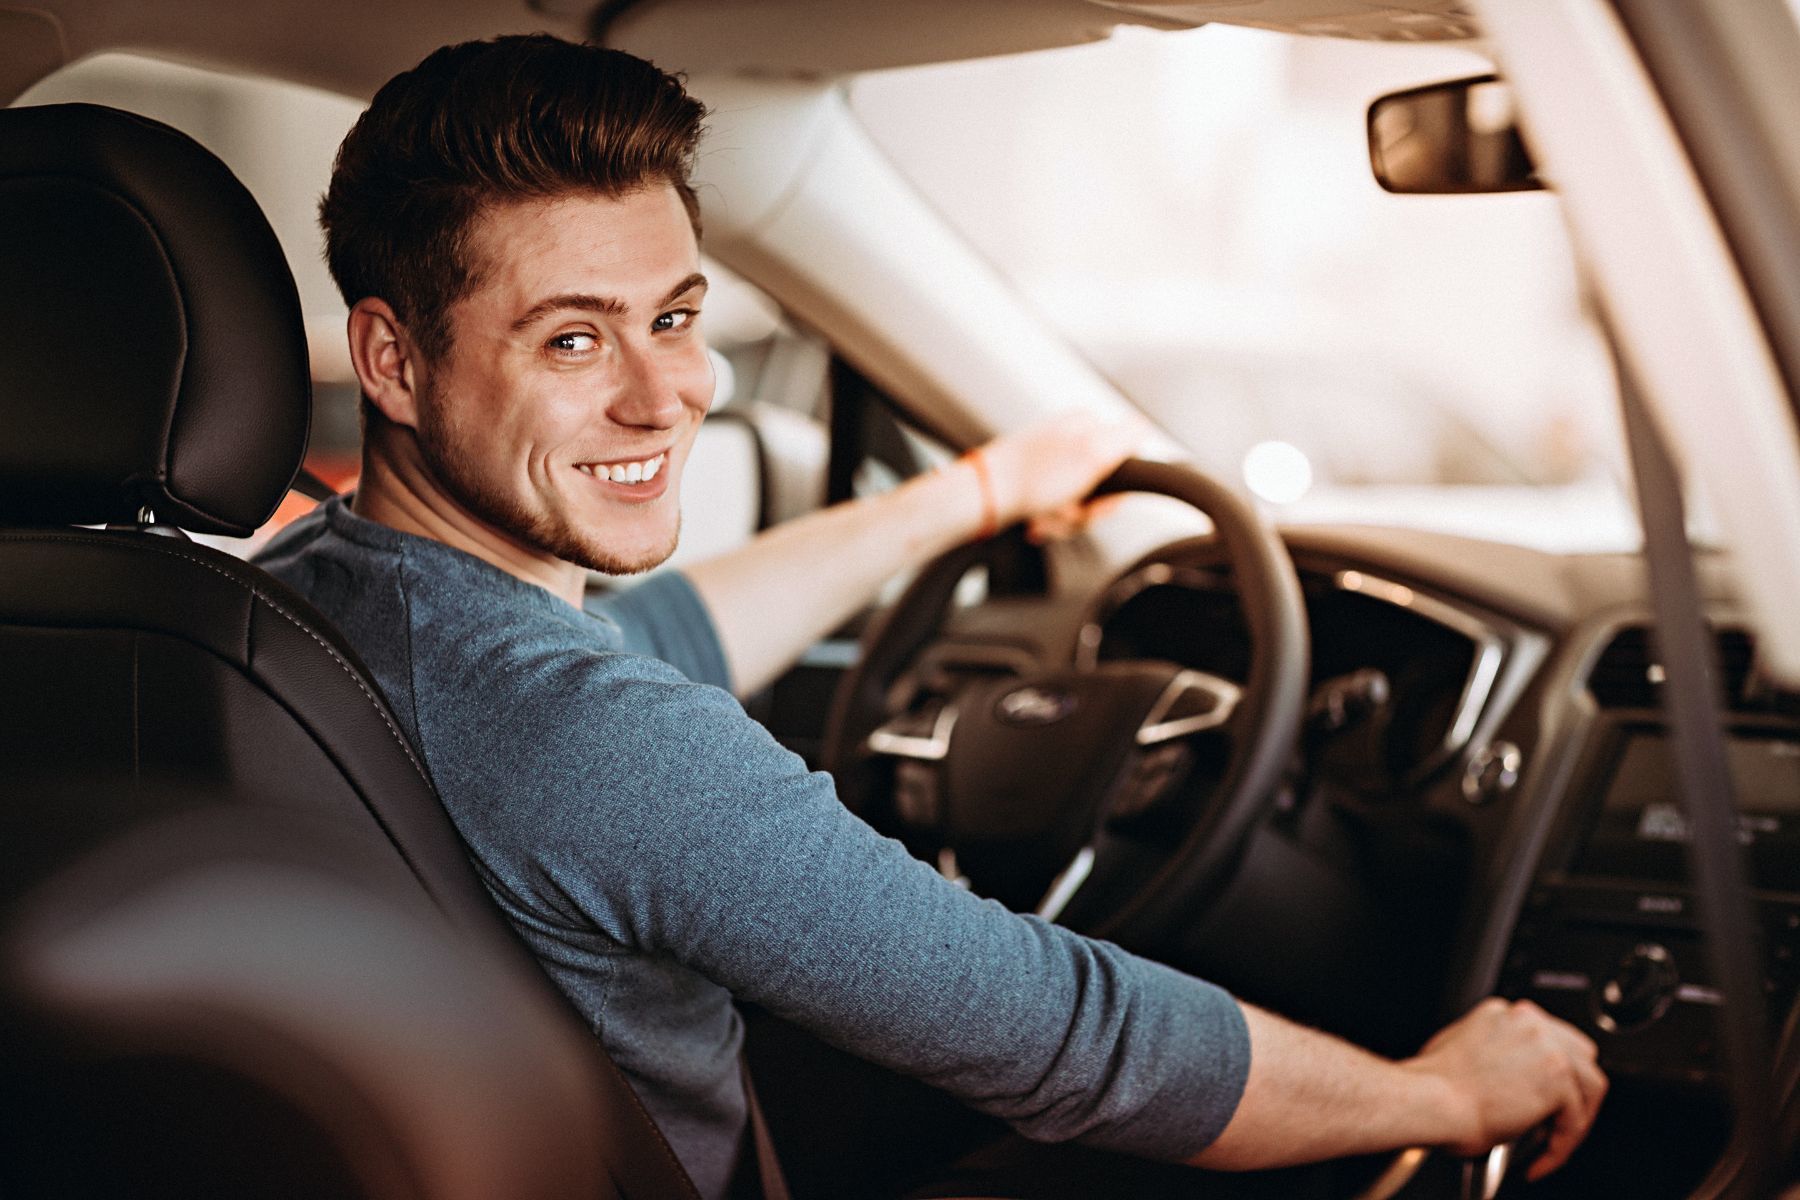 Tips for Students Purchasing a Pre-Owned Vehicle